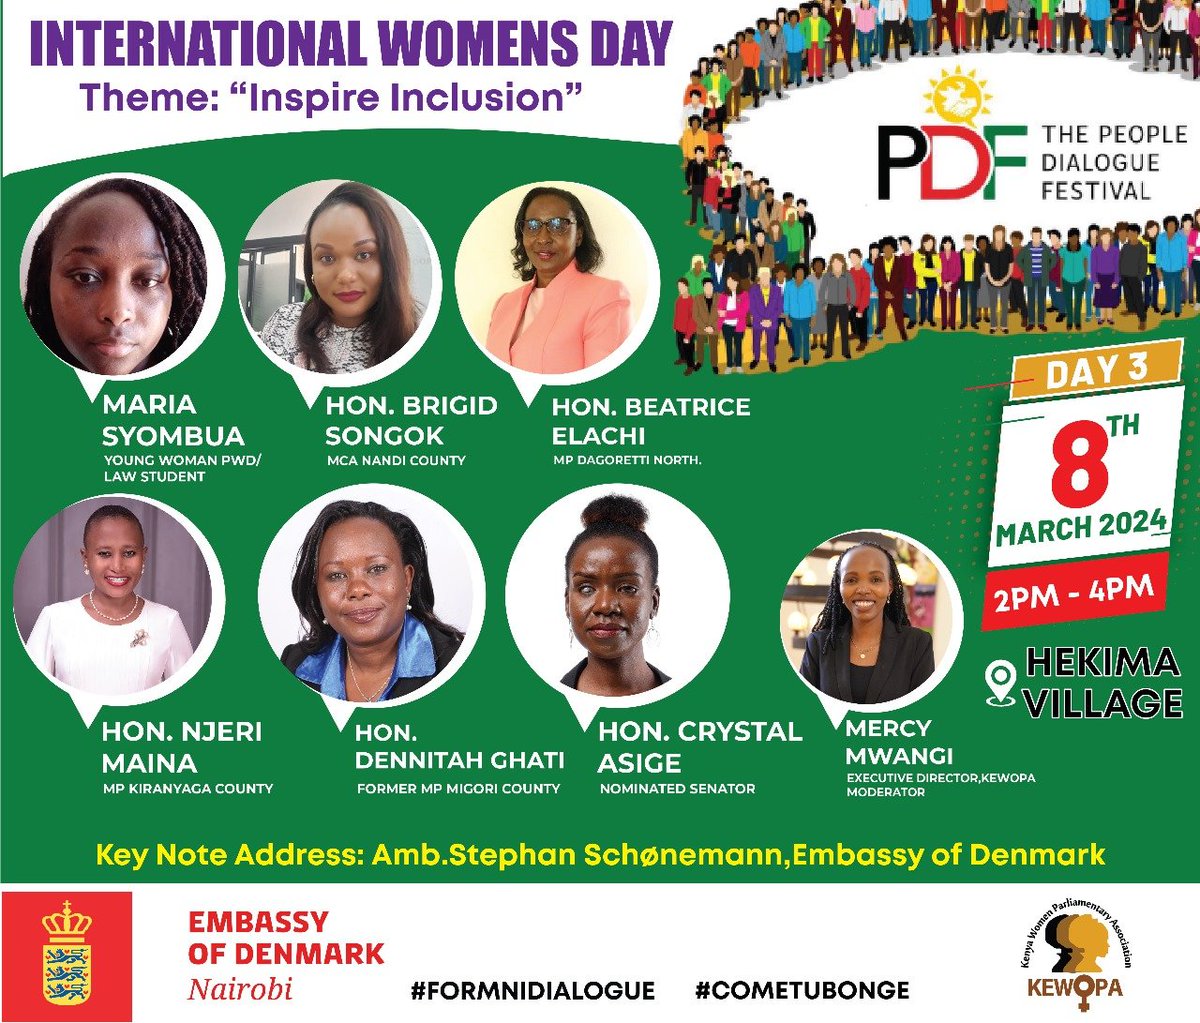 Join us tomorrow as we co-host with @denmarkinkenya an event at the @thePDFestival to mark the International Women's Day at Hekima Village. #InspireInclusion #WomeninPoliticsKE #IWD2024 #ComeTubonge